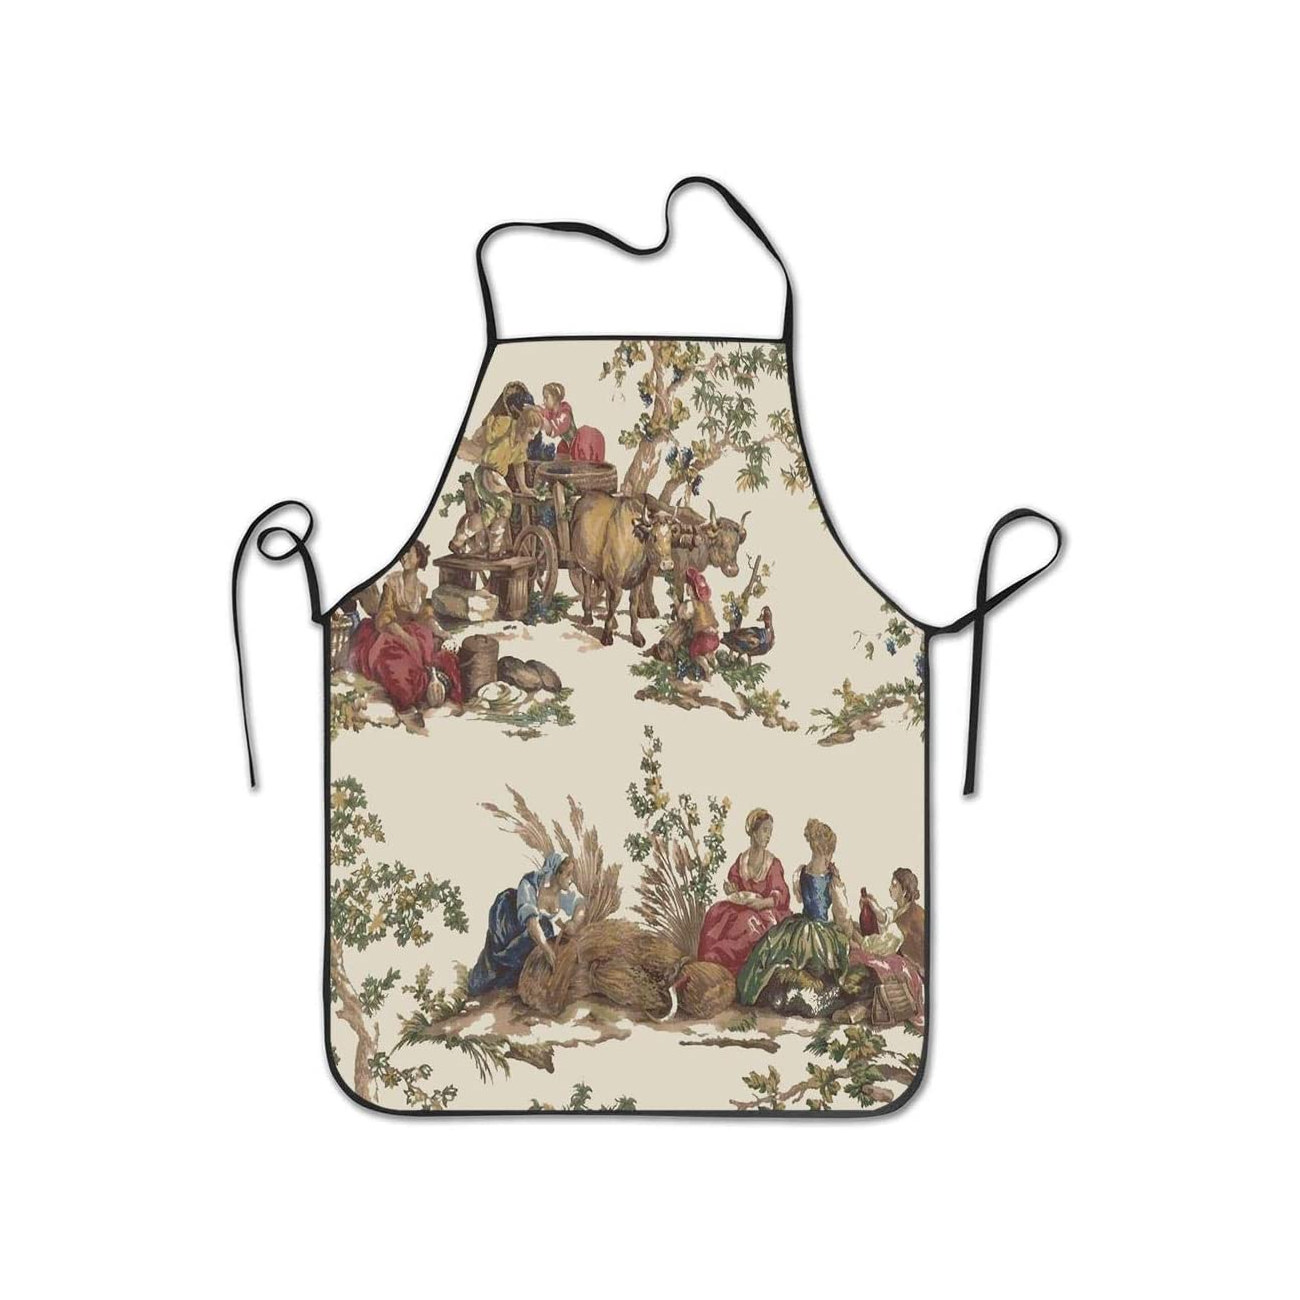 $14 – French Country Toile Print Cooking Apron